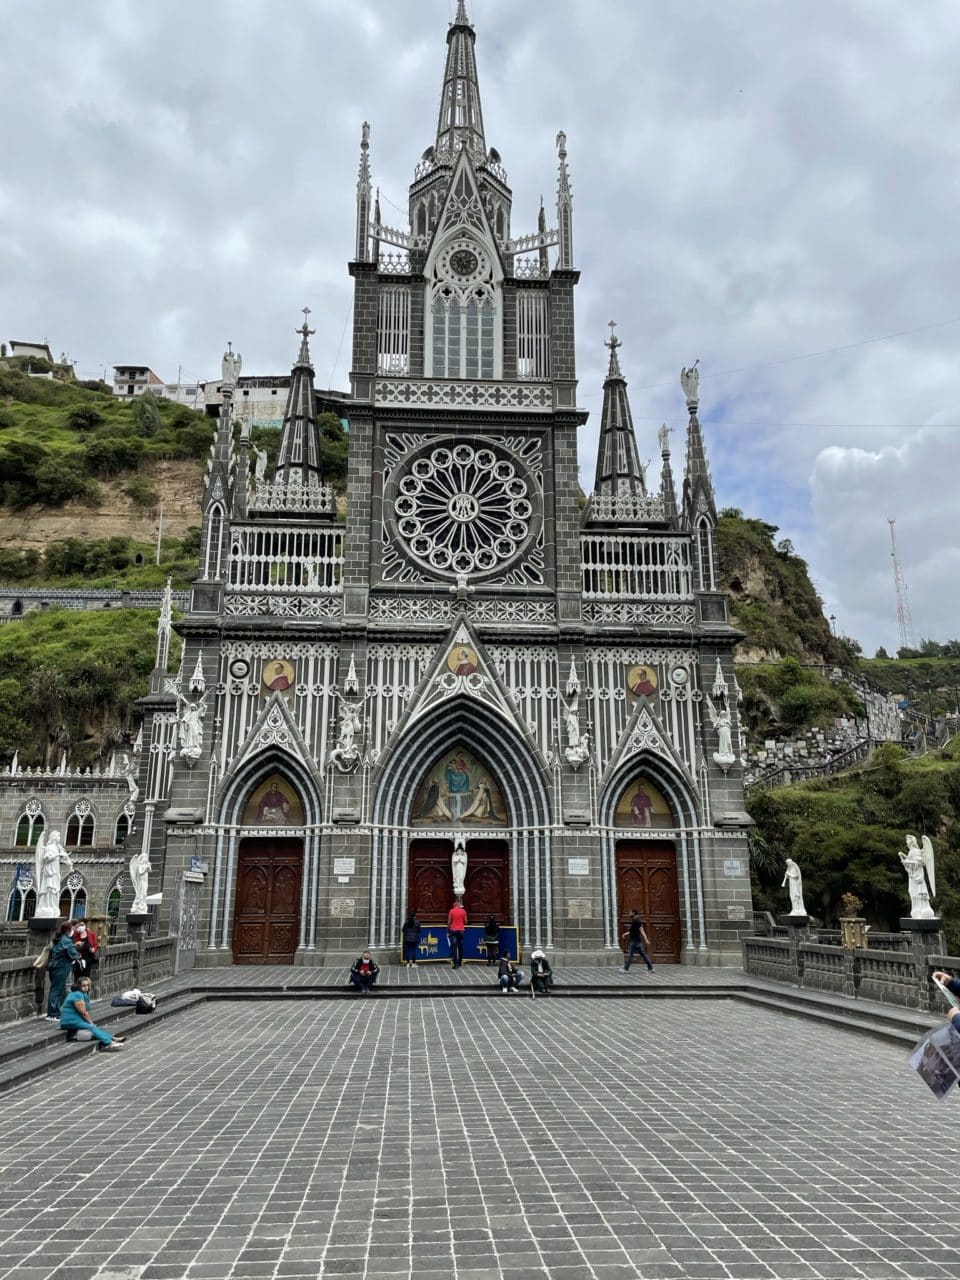 The entrance to Our Lady of Las Lajas in Columbia